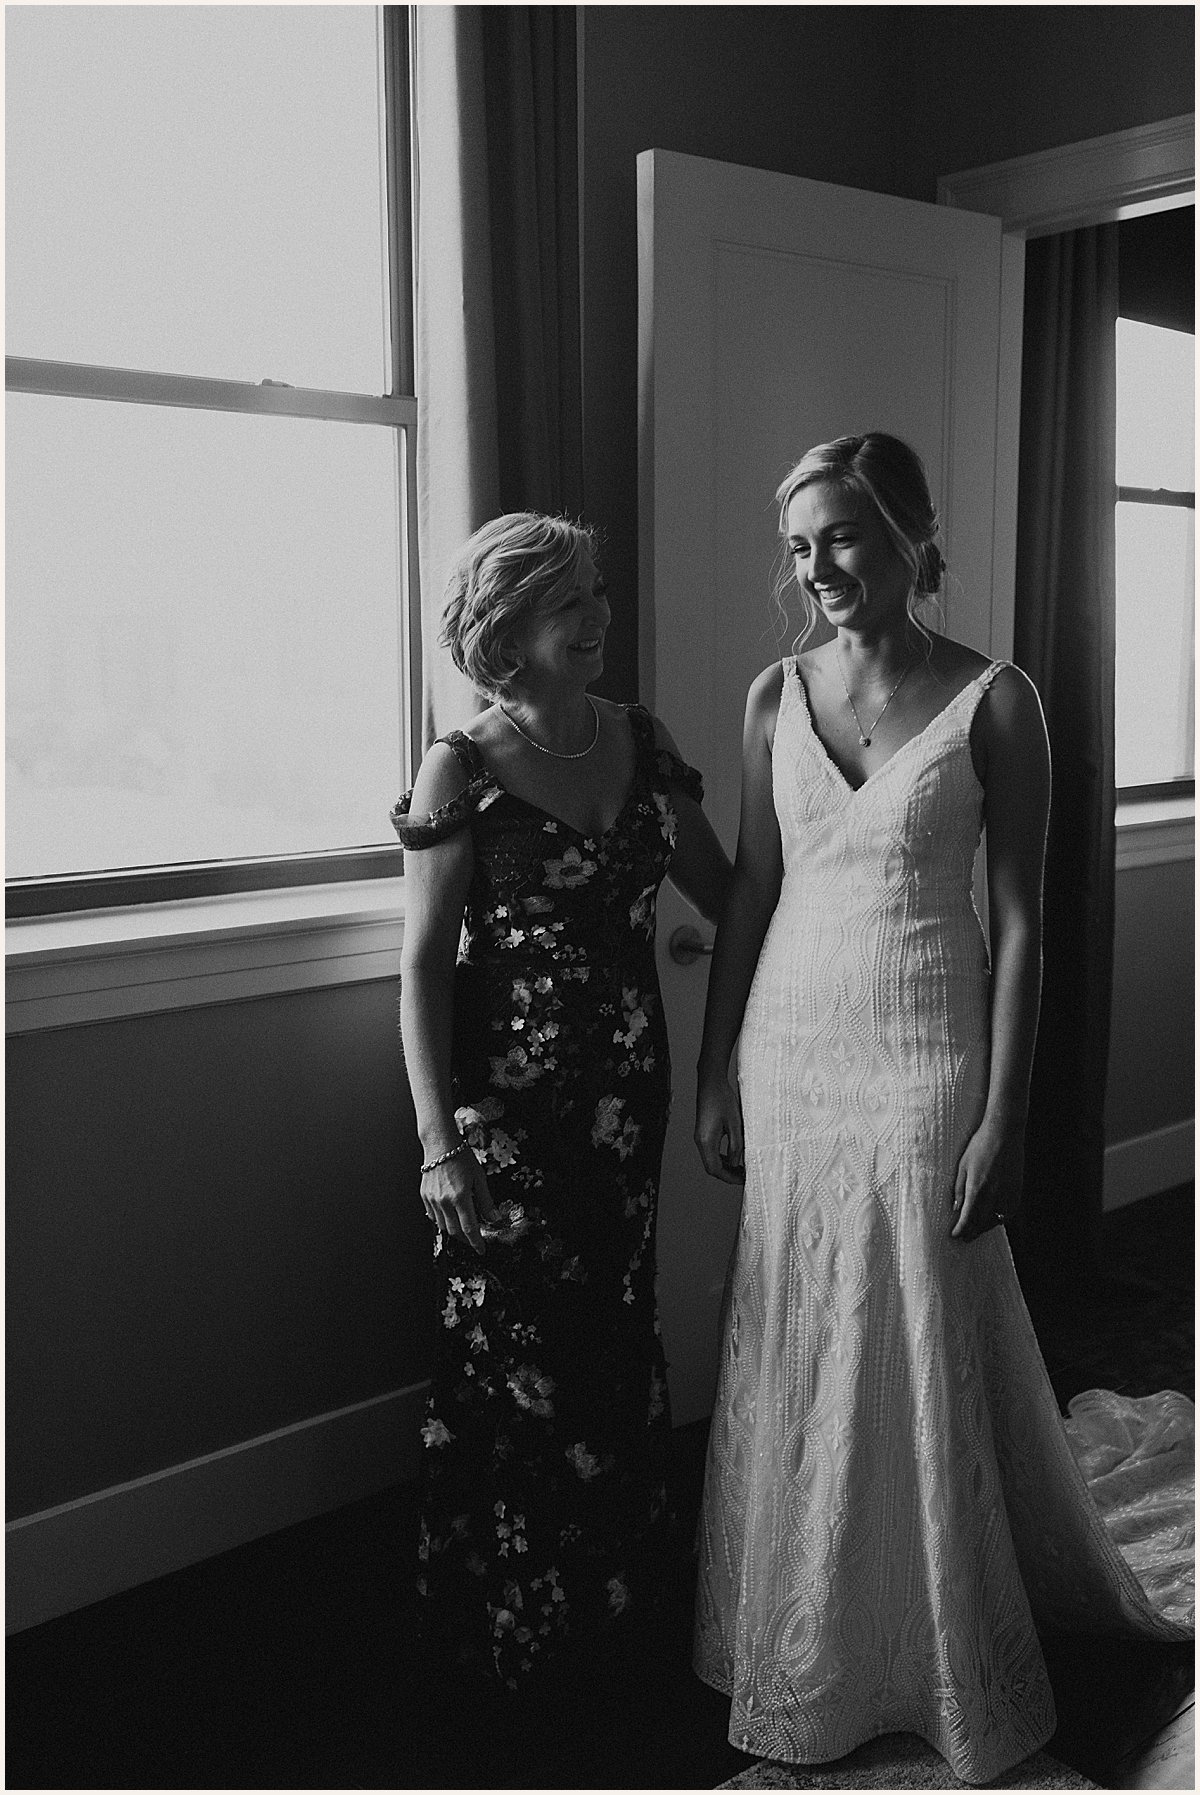 Mom and daughter on wedding day | Lauren Parr Photography